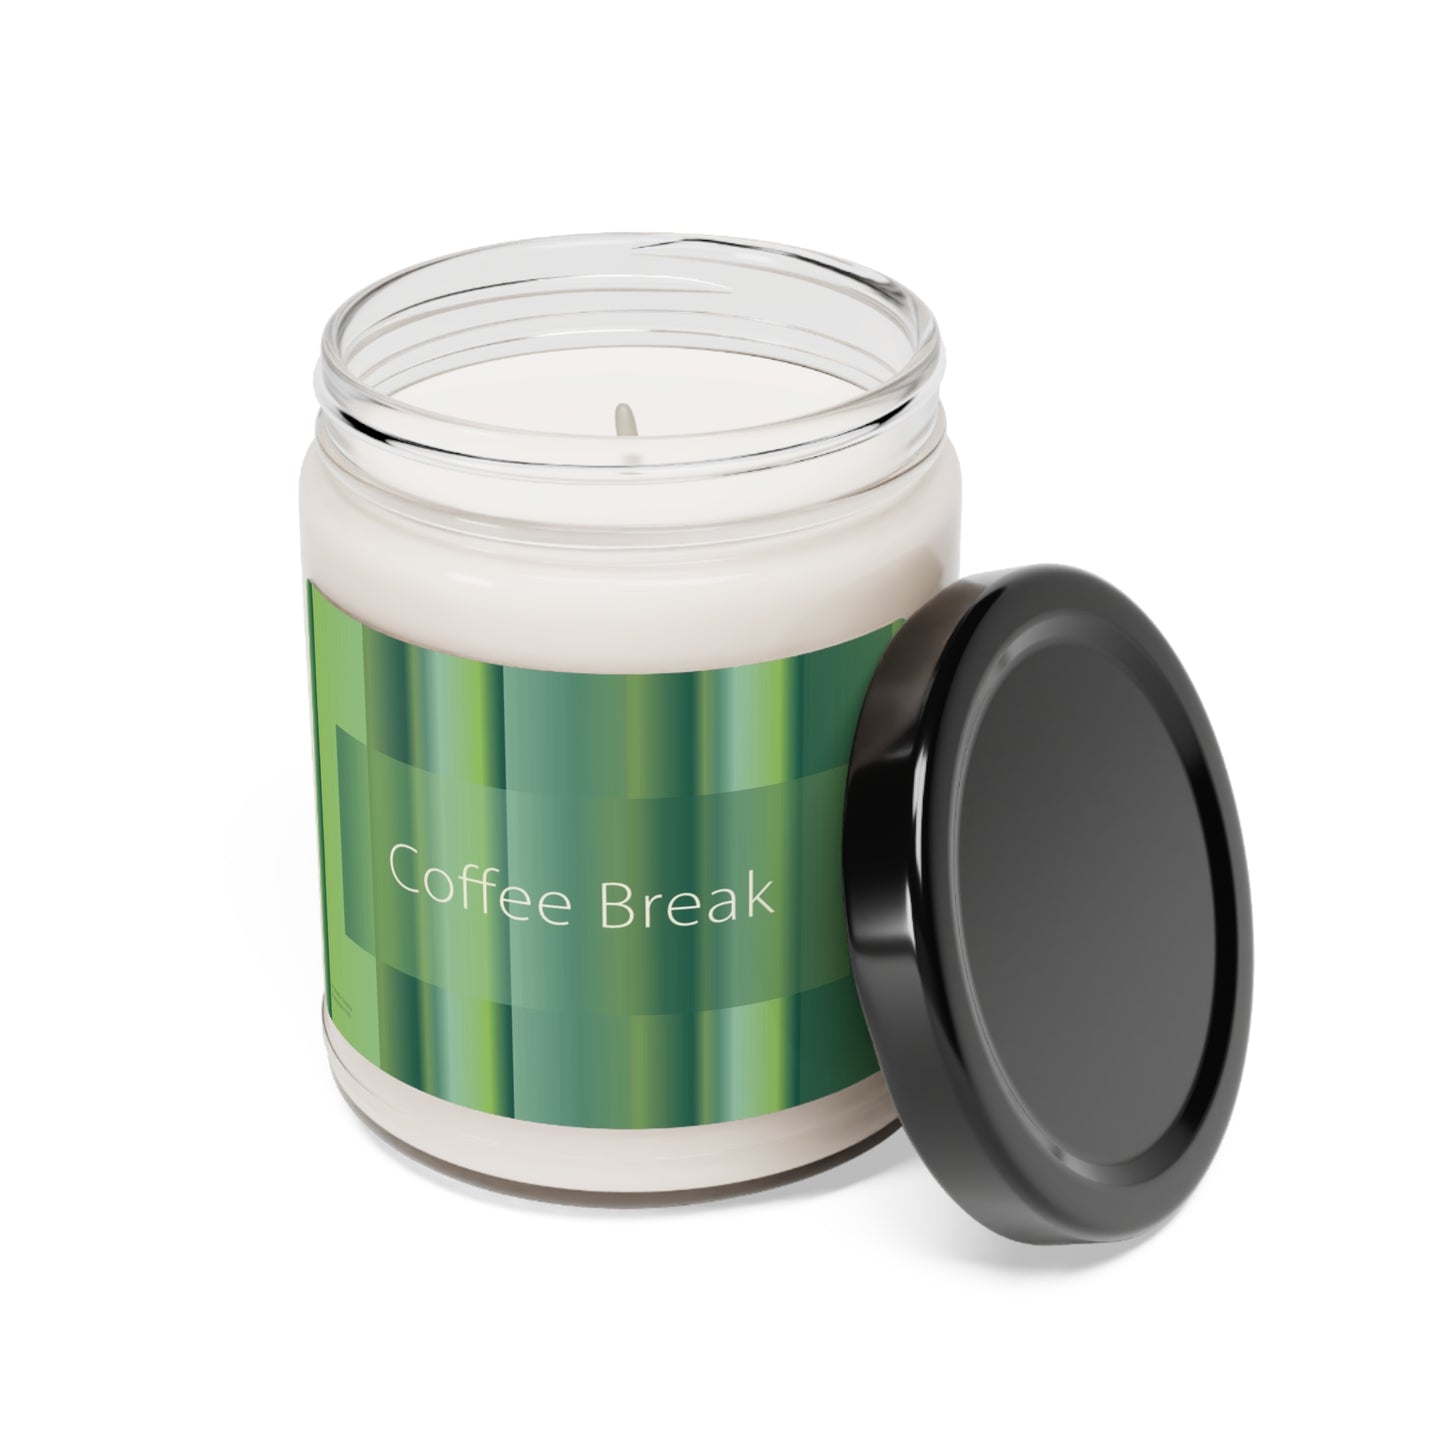 Scented Soy Candle, 9oz Coffee Break - Design No.1100